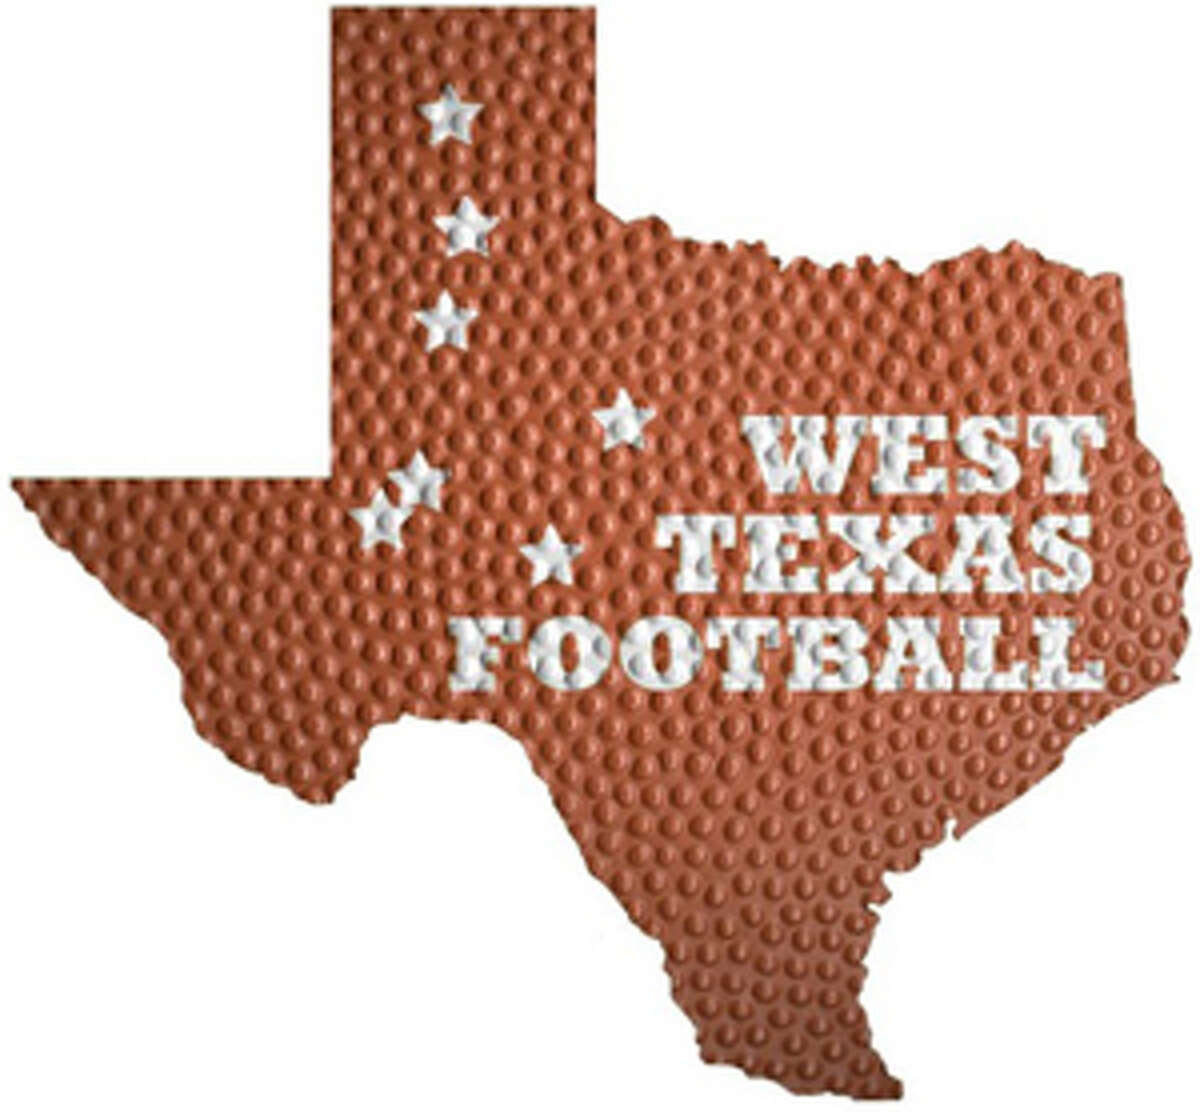 Follow our live game coverage each Friday night throughout the football season at mywesttexas.com, or 'like' us at www.facebook.com/WestTexasFootball to have updated news and scores delivered directly to your wall.